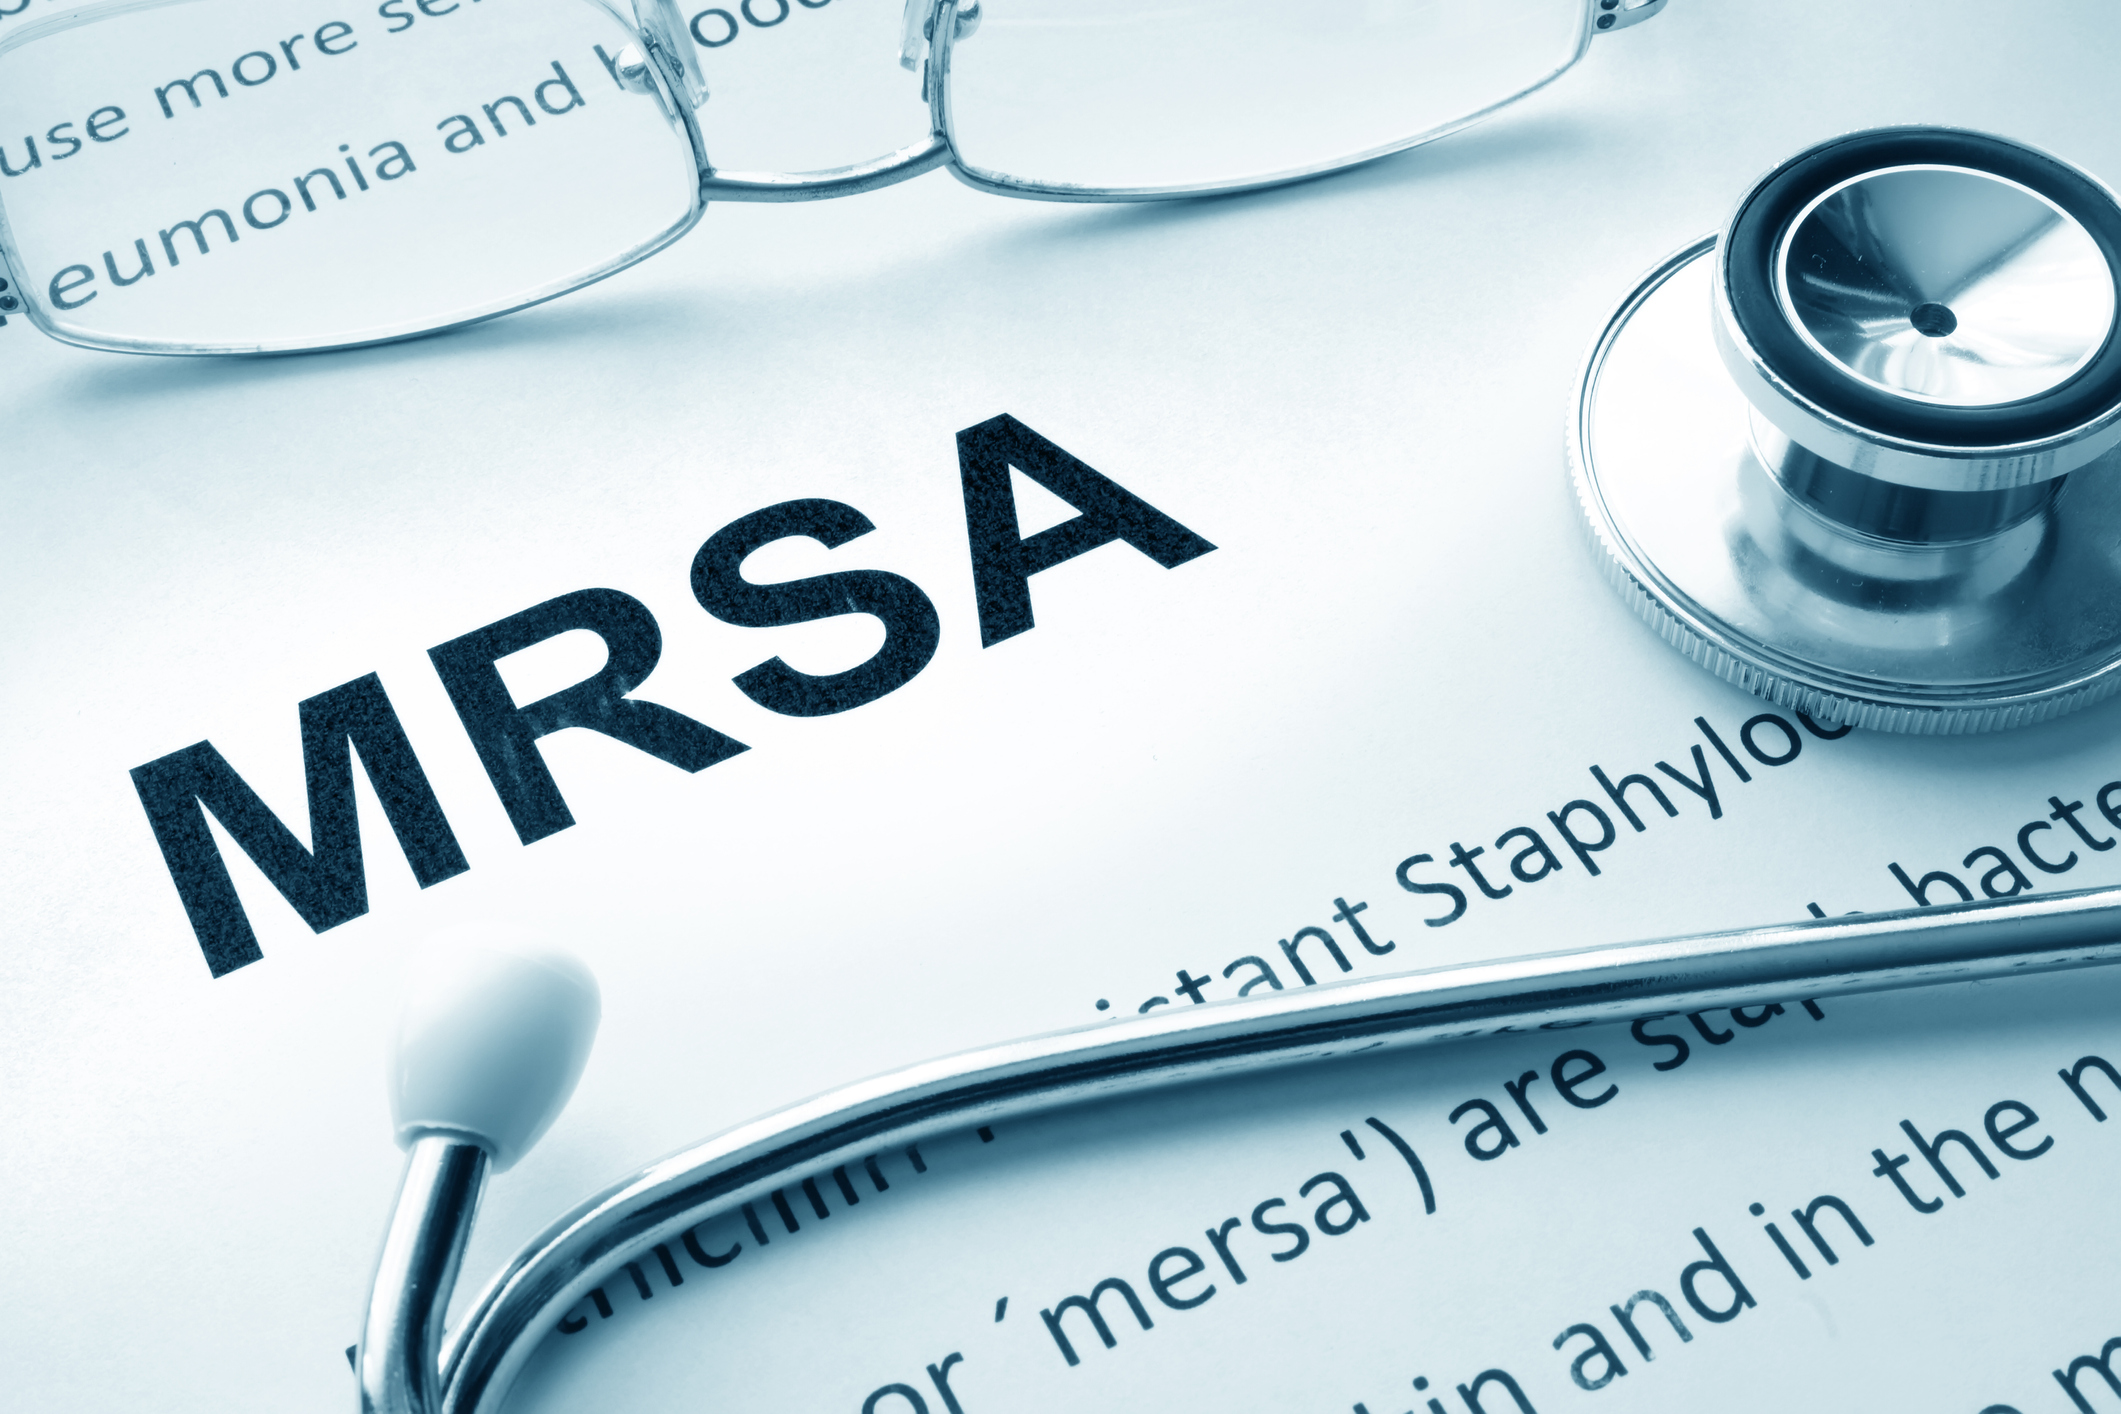 MRSA is a strain of golden staphylococcus that is resistant to commonly used antibiotics.